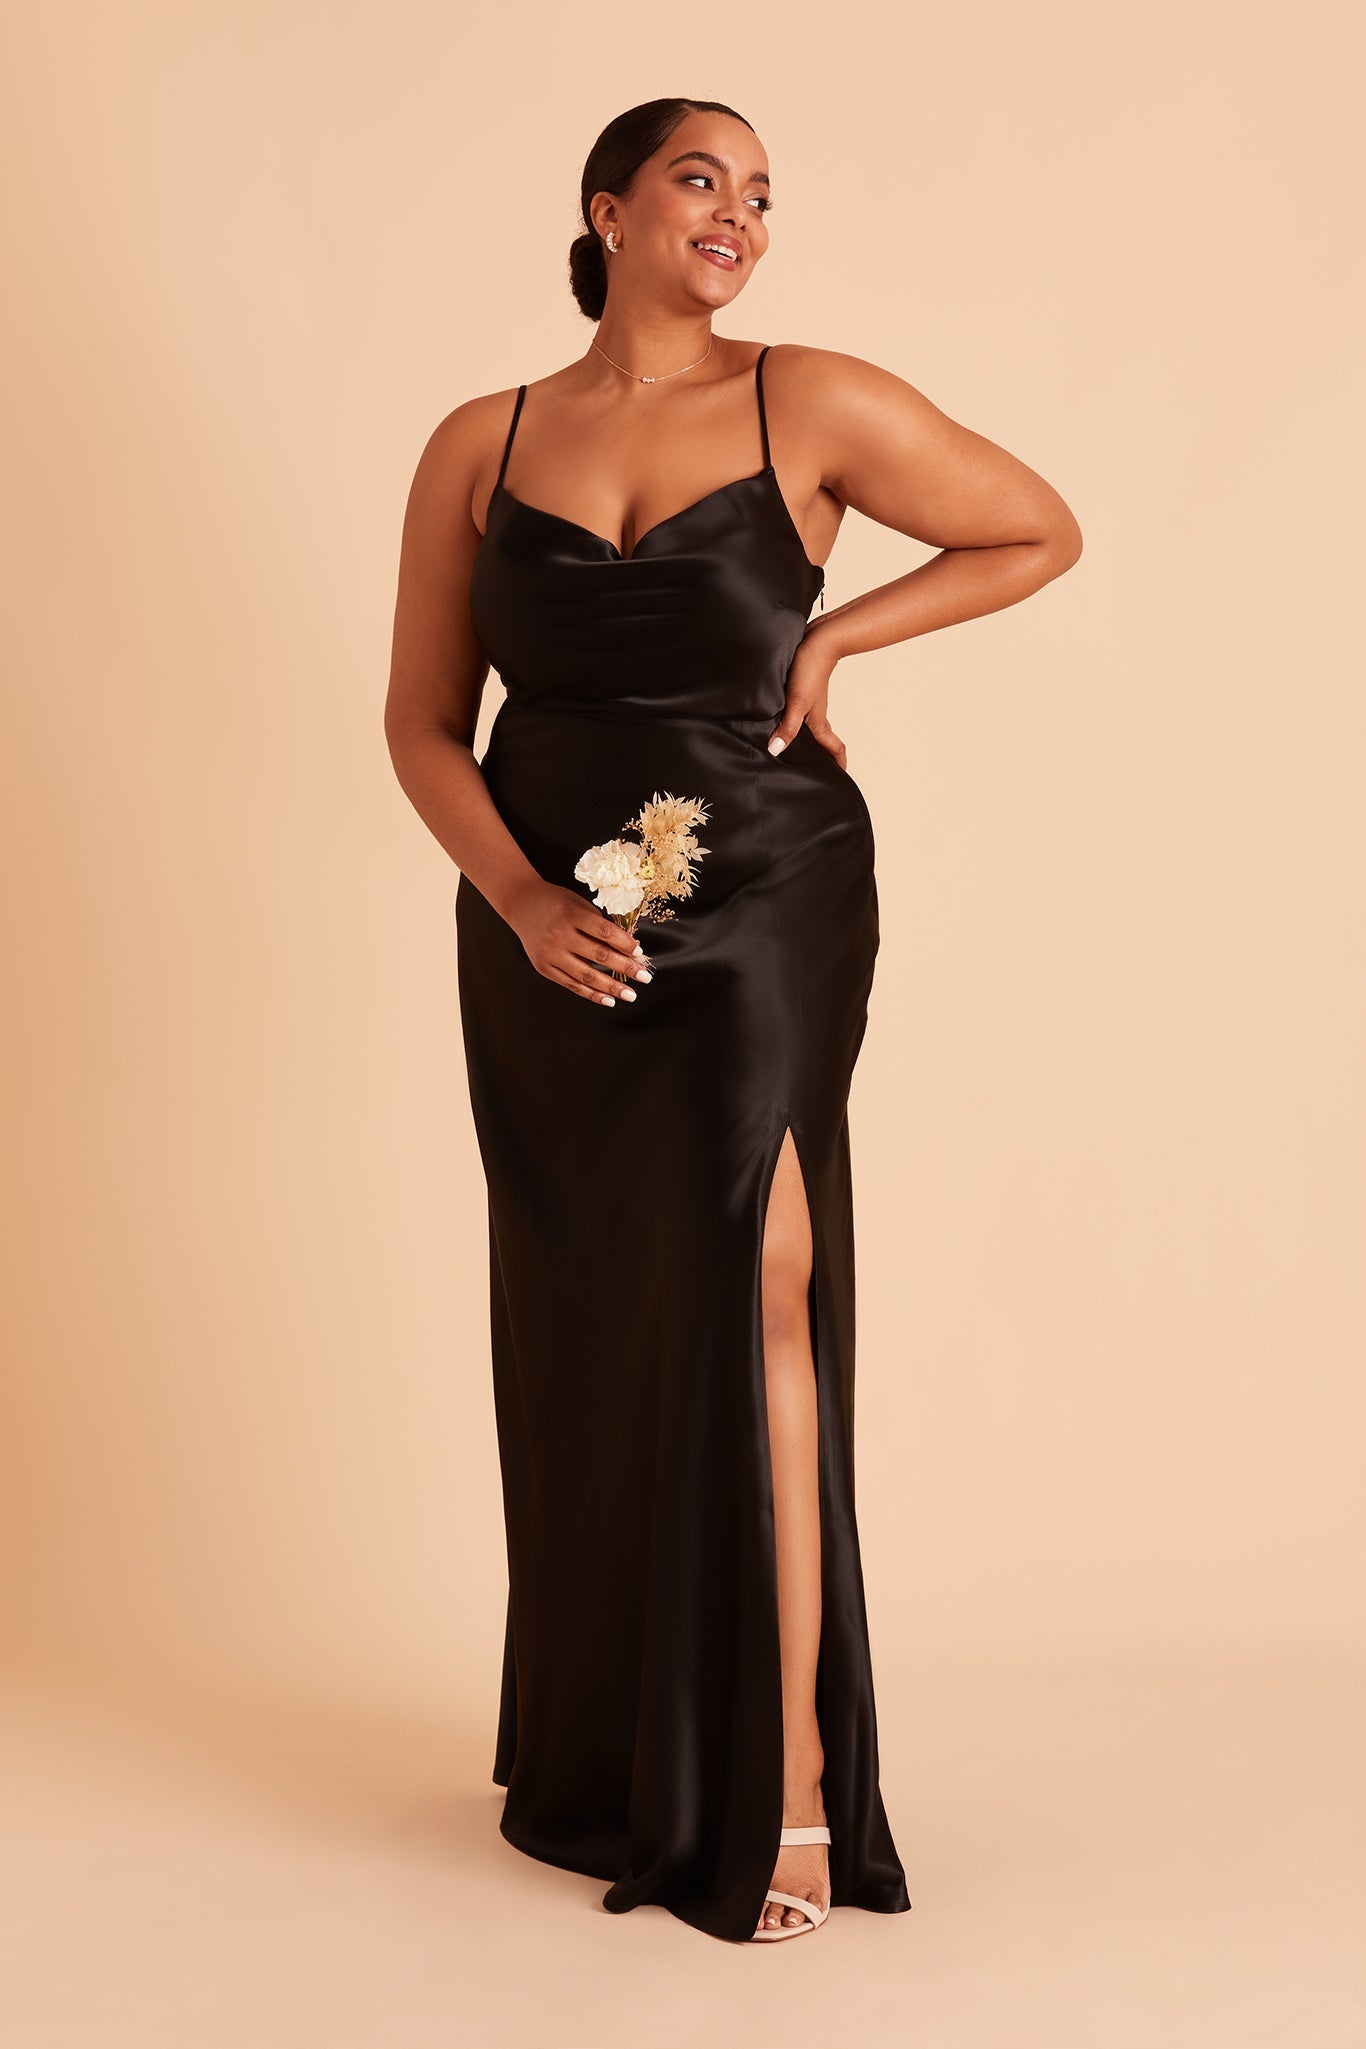 Lisa long plus size bridesmaid dress with slit in black satin by Birdy Grey, front view